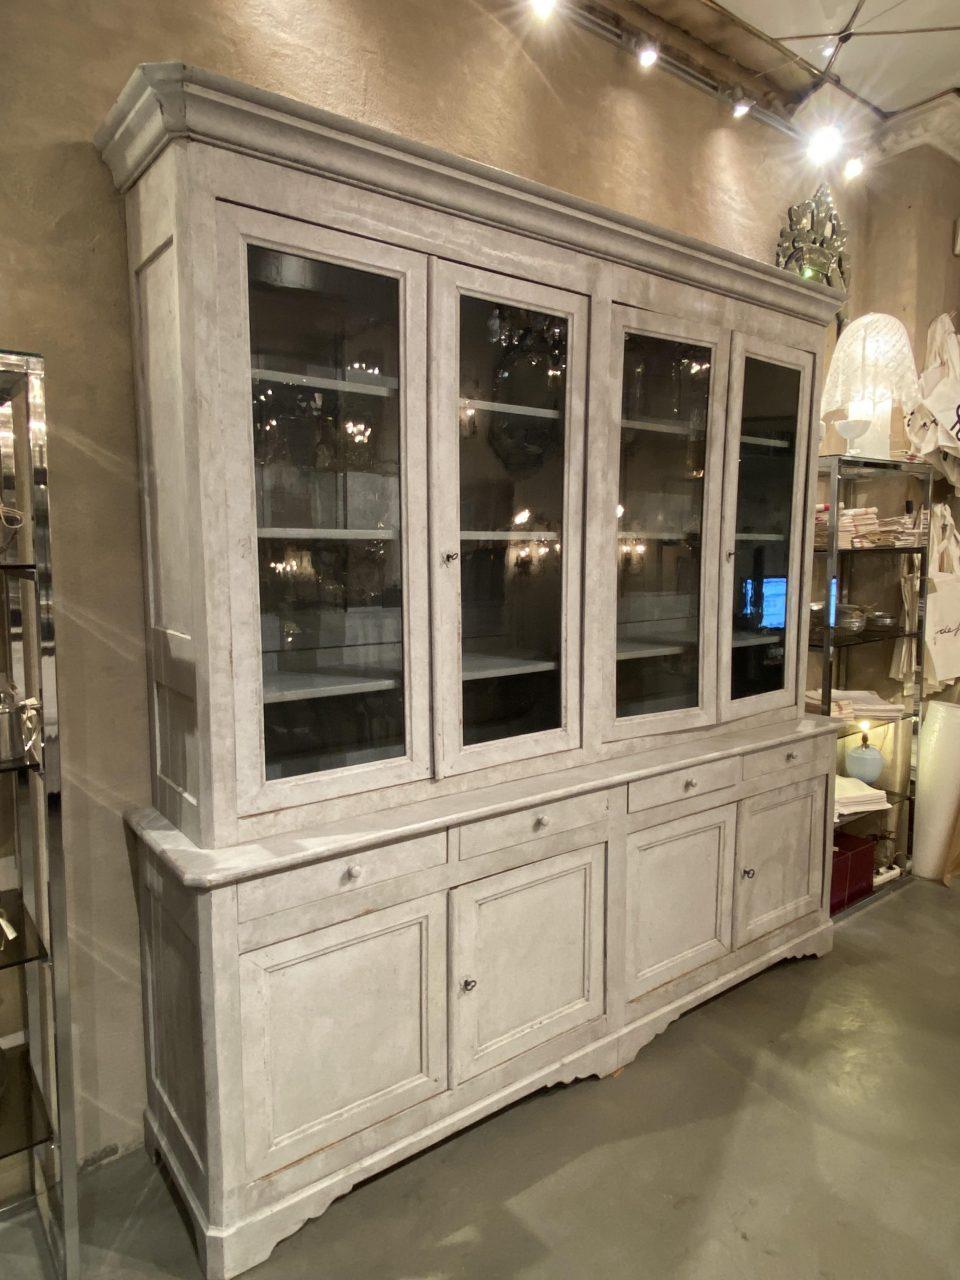 Elegant and very handsome antique French 2-part bookcase. It has 4 beautiful high display vitrine doors, with large quality glass sections. An ideal and impressive decor piece for storage of e.g. porcelain service and wine glasses.

The cabinet